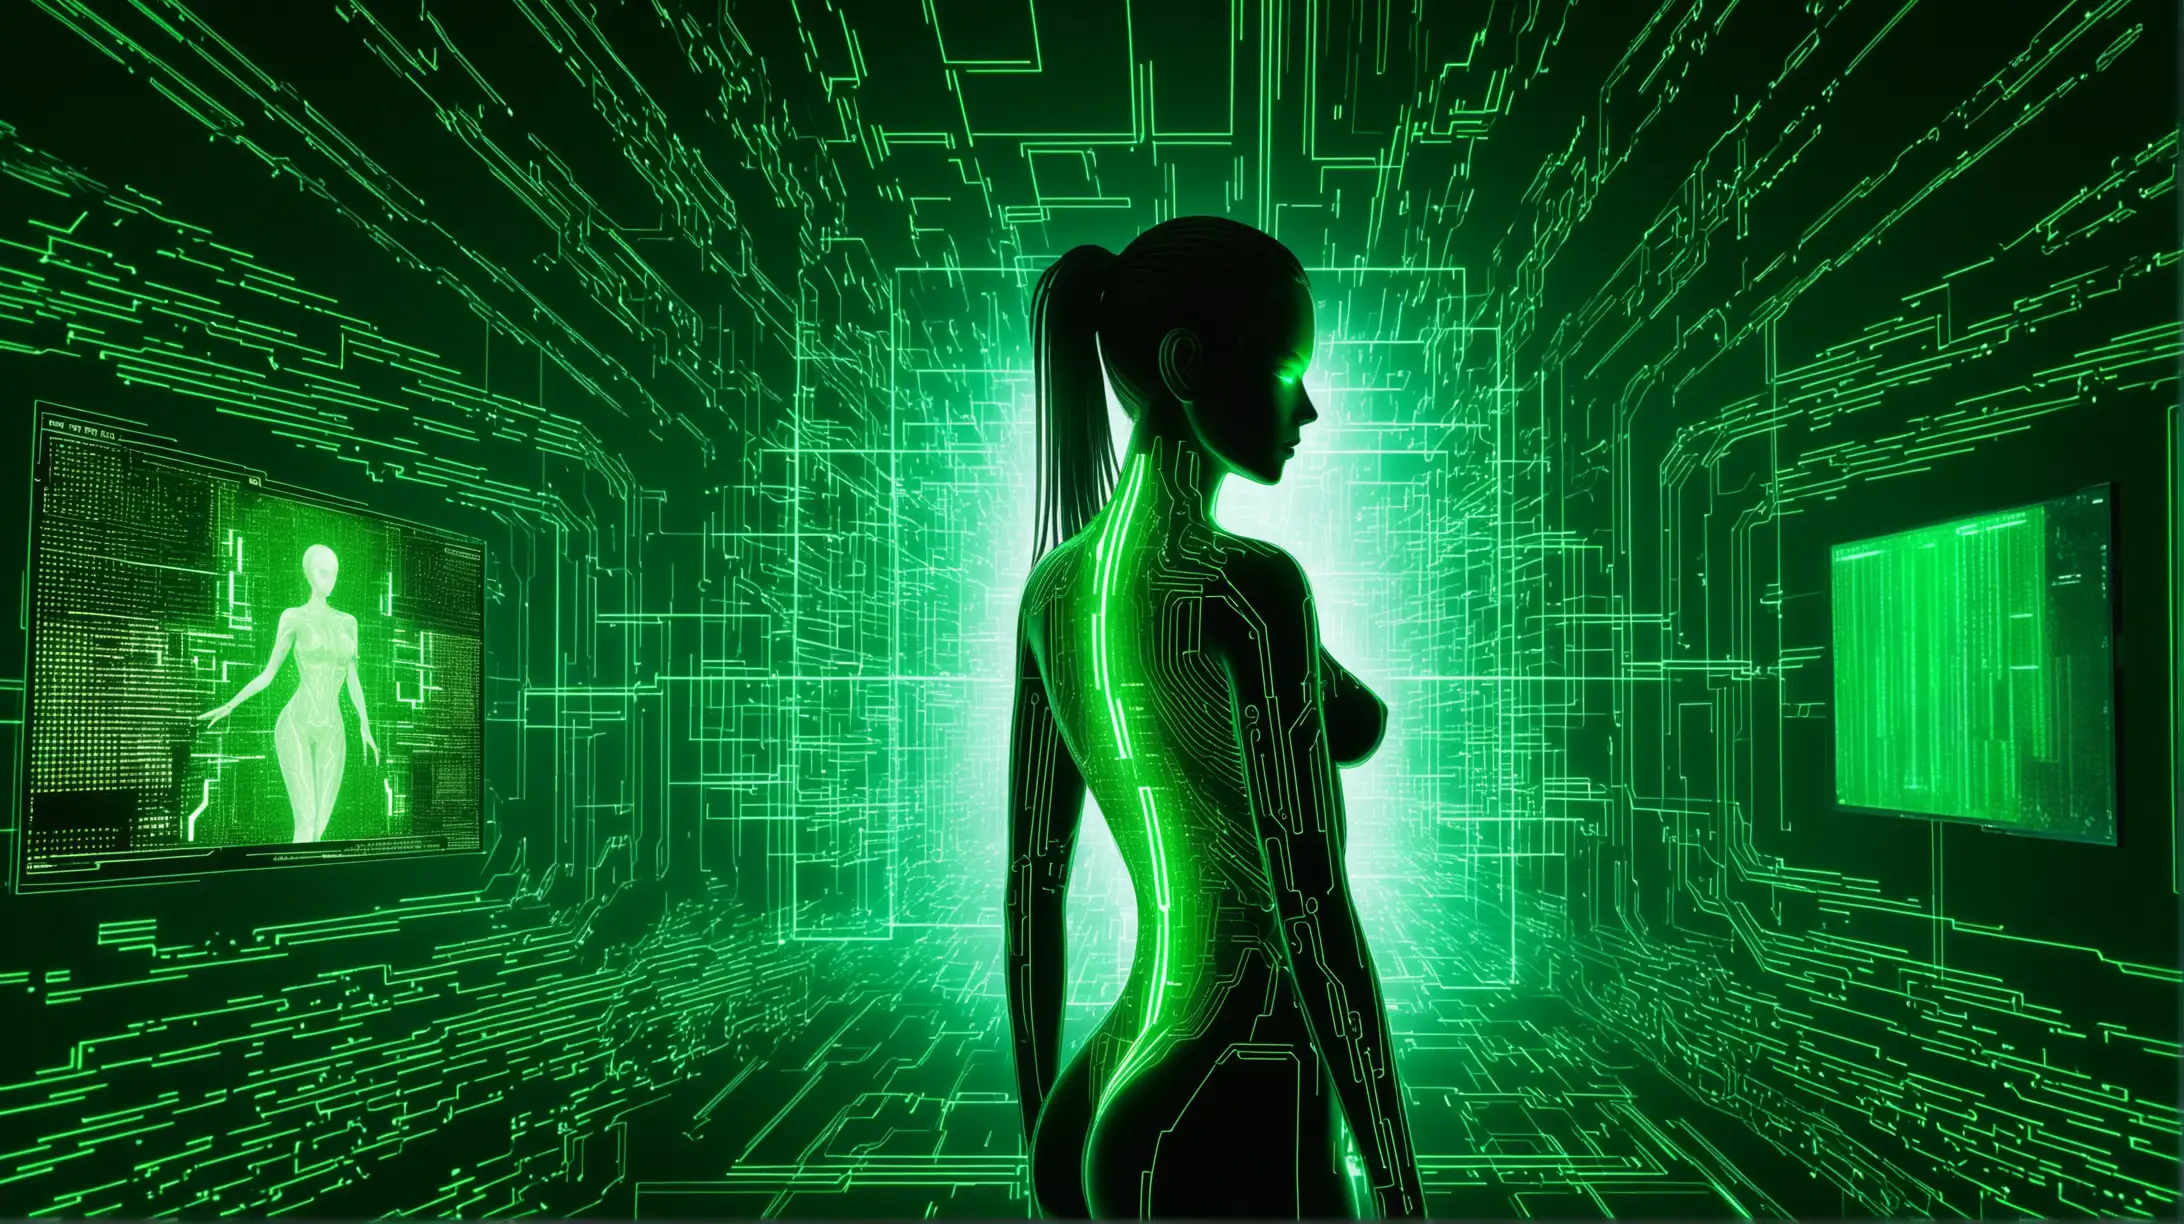 A sexy woman figure in green matrix-like code, translucent figures, digital interface, neural network visualization, futuristic technology, data streams, glowing green lines, cyberpunk aesthetic, advanced computer graphics, intricate patterns, high-tech concept, dark background, sci-fi style, detailed and immersive, luminous green hues, dynamic lighting effects.